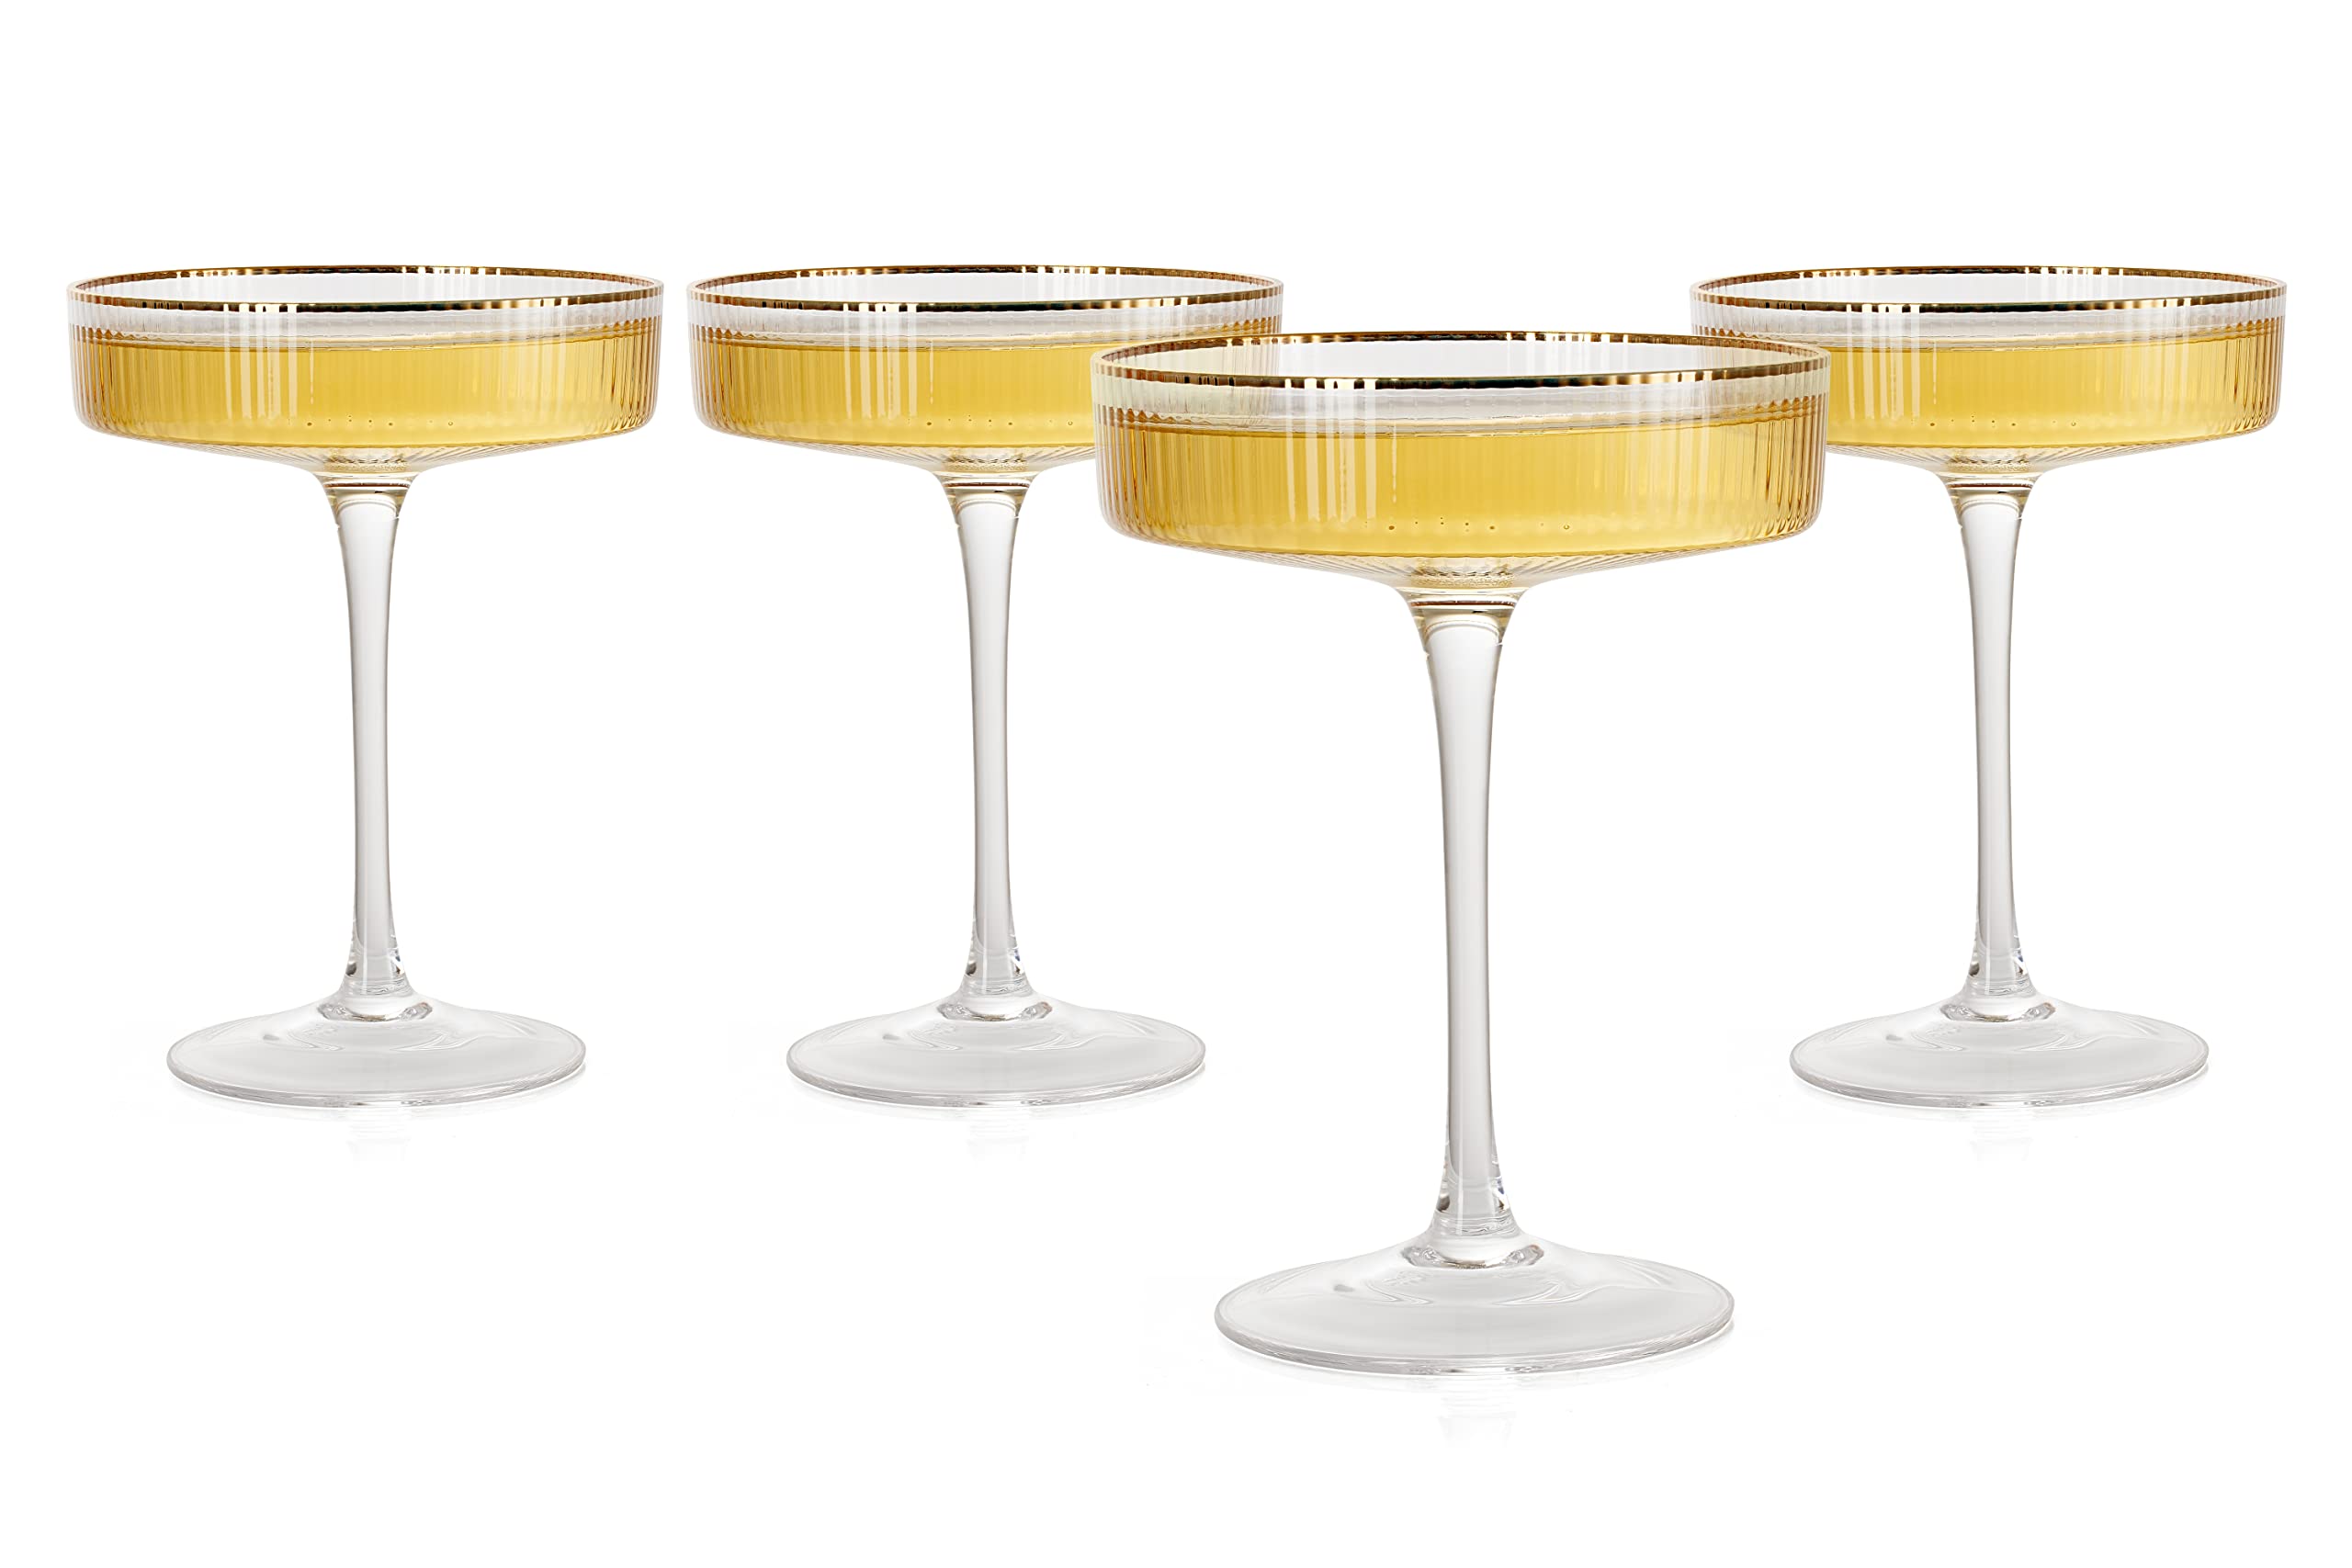 Ribbed Coupe Glasses With Gold Rim, For Martini, Champagne, Cocktails | Set of 4 | 8 oz Classic Manhattan Glasses Speakeasy Cocktail, Ripple Coupes Glasses, Art Deco Gatsby Vintage, Crystal Stemmed